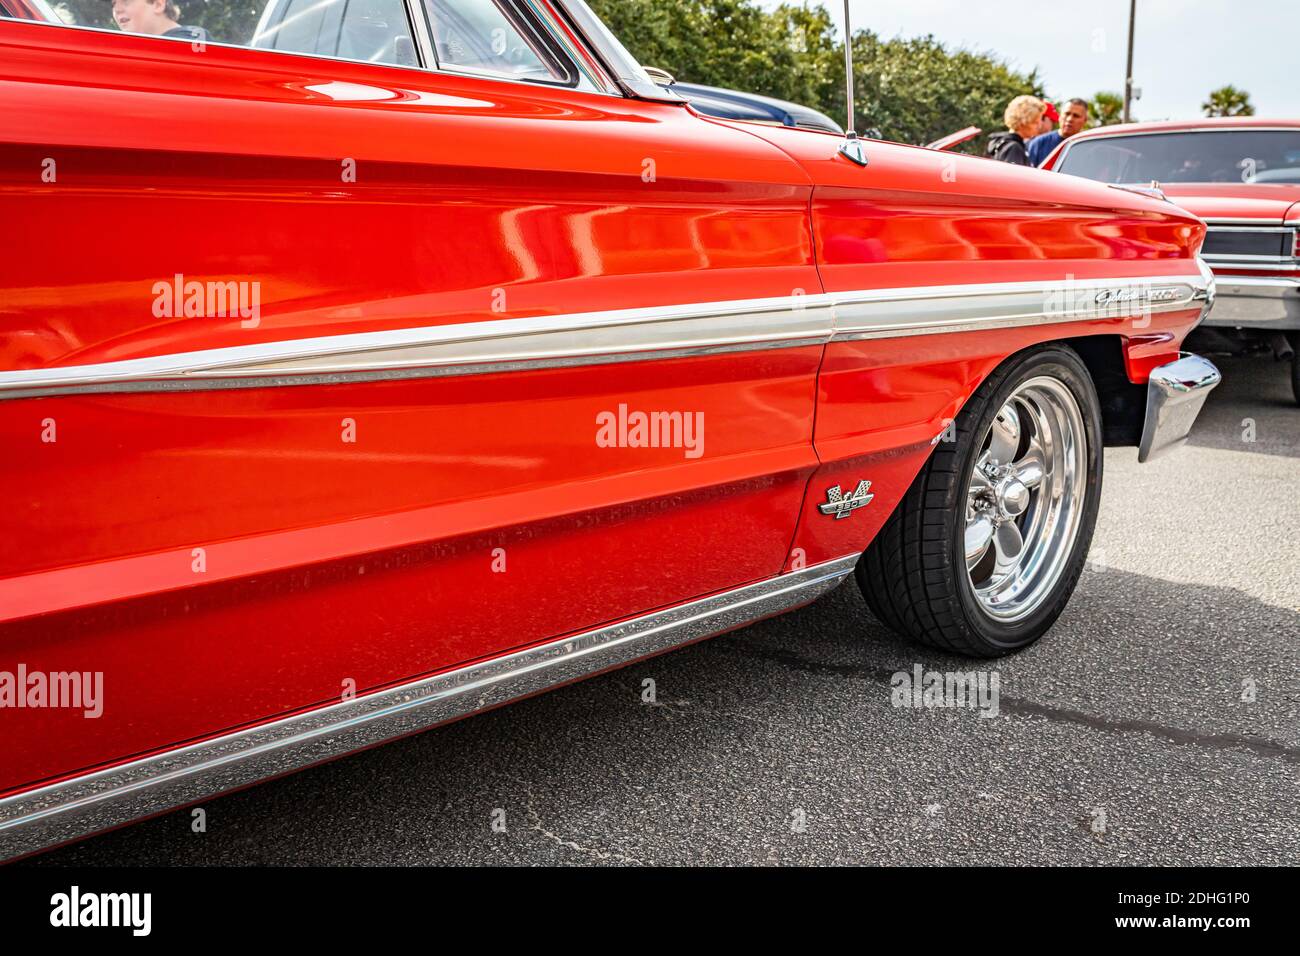 Tybee Island, GA - October 3, 2020: 1964 Ford Galaxie 500 XL hardtop coupe  at a local car show. Stock Photo